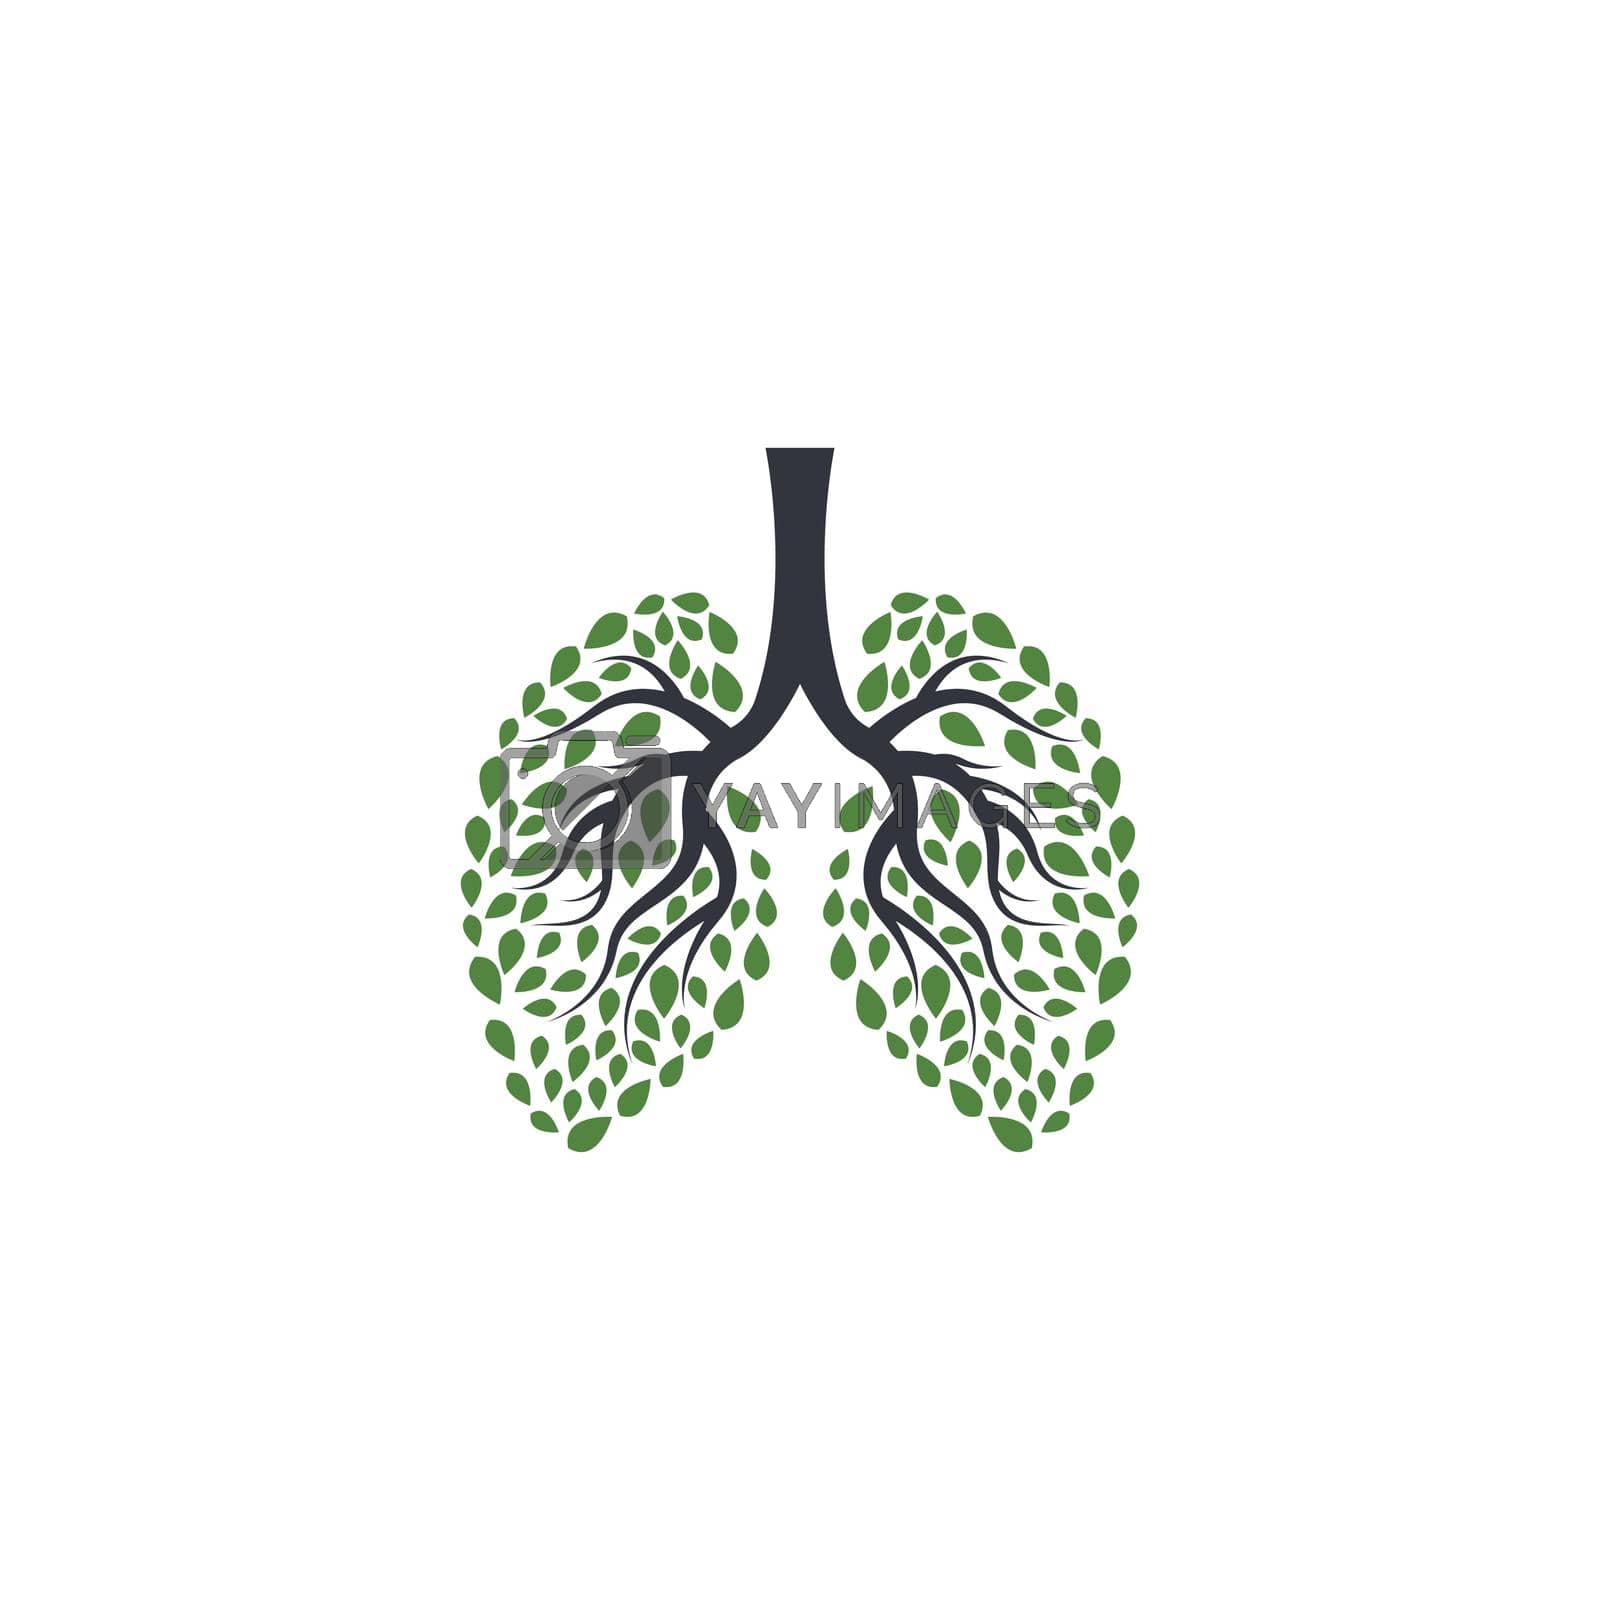 Royalty free image of Lung logo template vector icon by Attades19